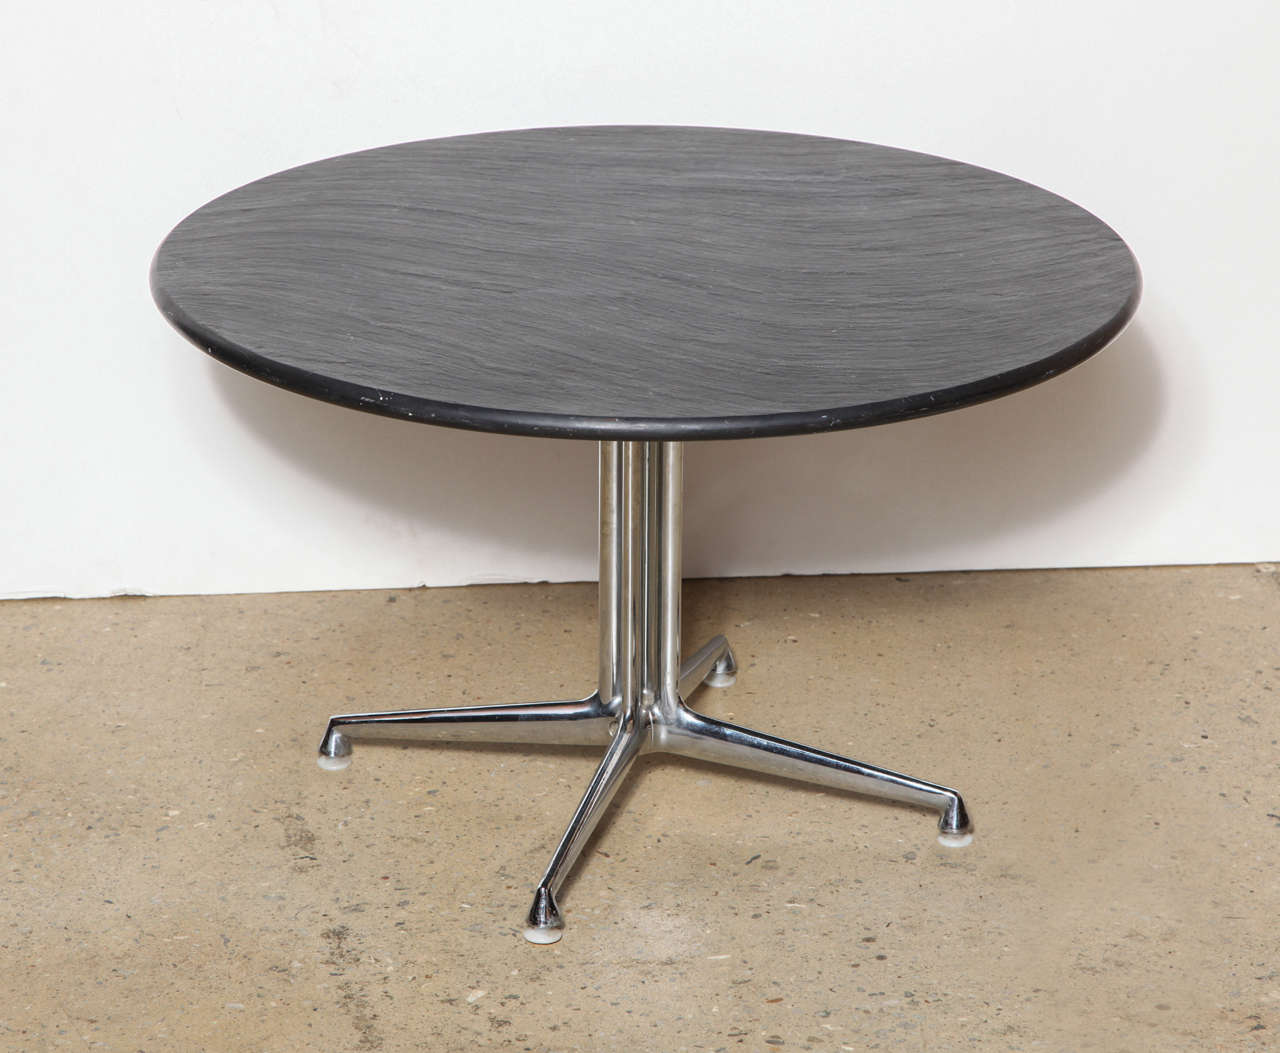 Modern American, 1960s Eames for Herman Miller La Fonda occasional table. Featuring the original, circular dark charcoal gray slate top, four-footed chrome pedestal base and white metal glides. Excellent for compact space, classic, with label.